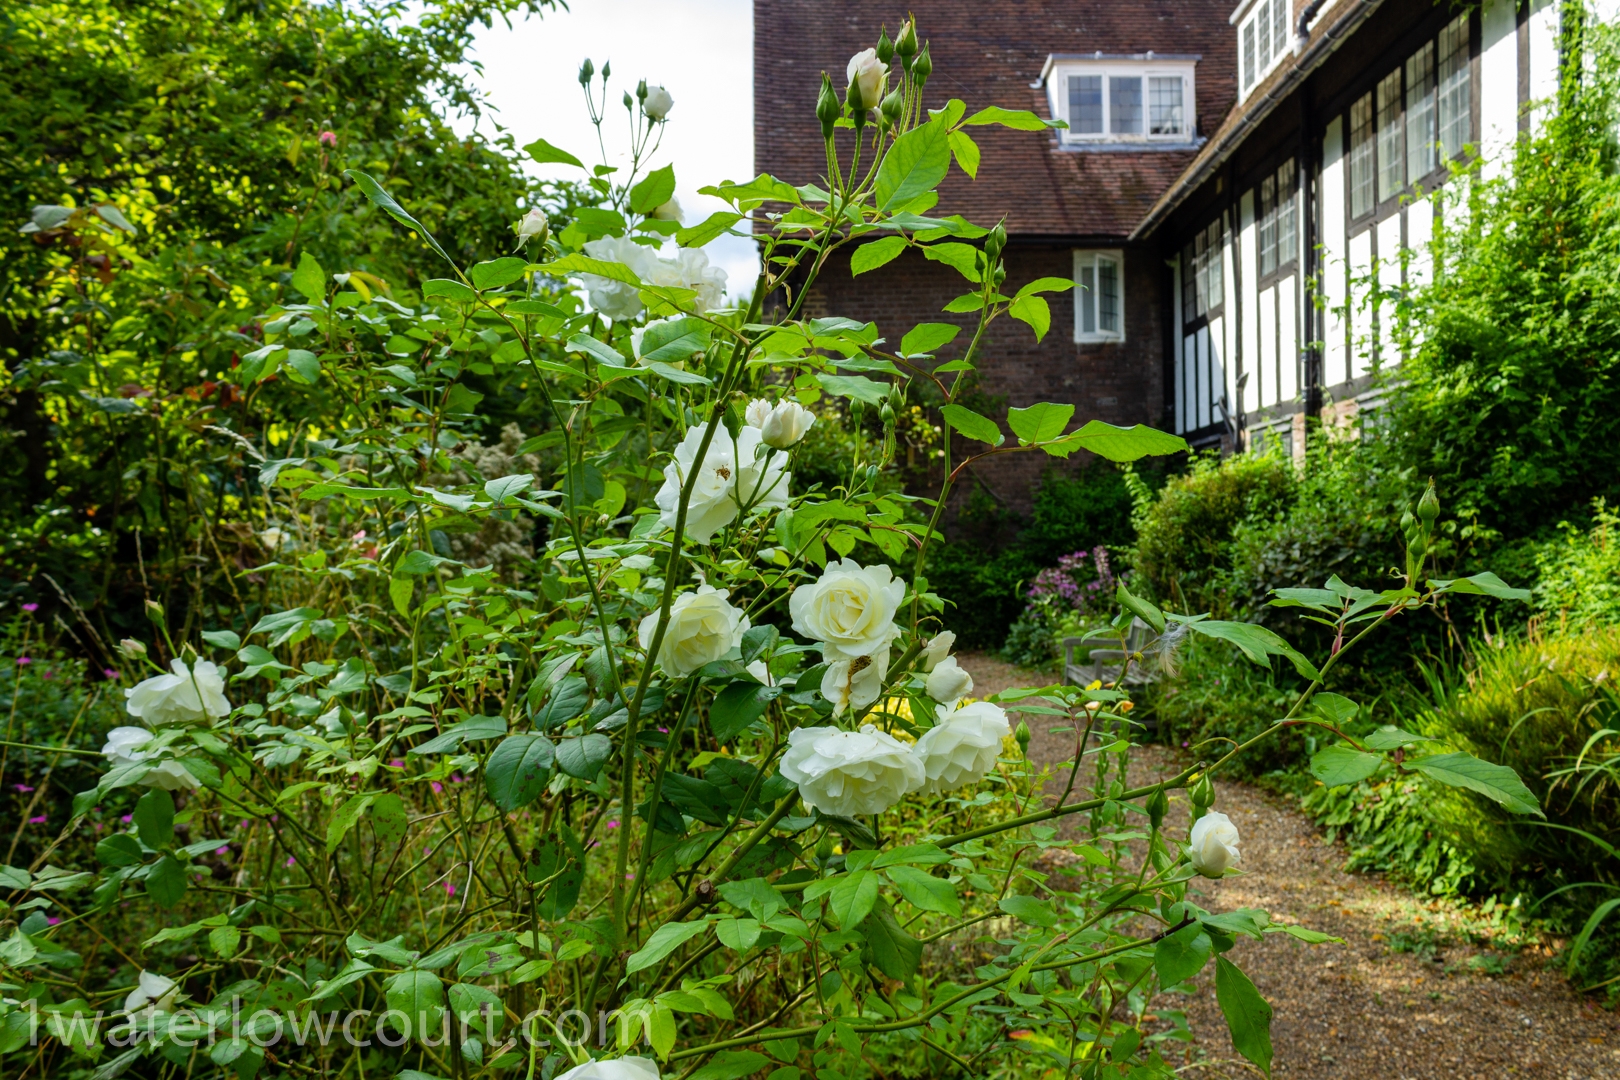 The south-west communal garden of Waterlow Court – white rose in bloom. Waterlow Court is an Arts & Crafts Grade II* listed building designed by M. H. Baillie Scott, 1909. Waterlow Court is located in Hampstead Garden Suburb, London NW11 7DT. Flat 1 is a one-bedroom, ground-floor flat, and is for sale. Listed on Rightmove and Zoopla.